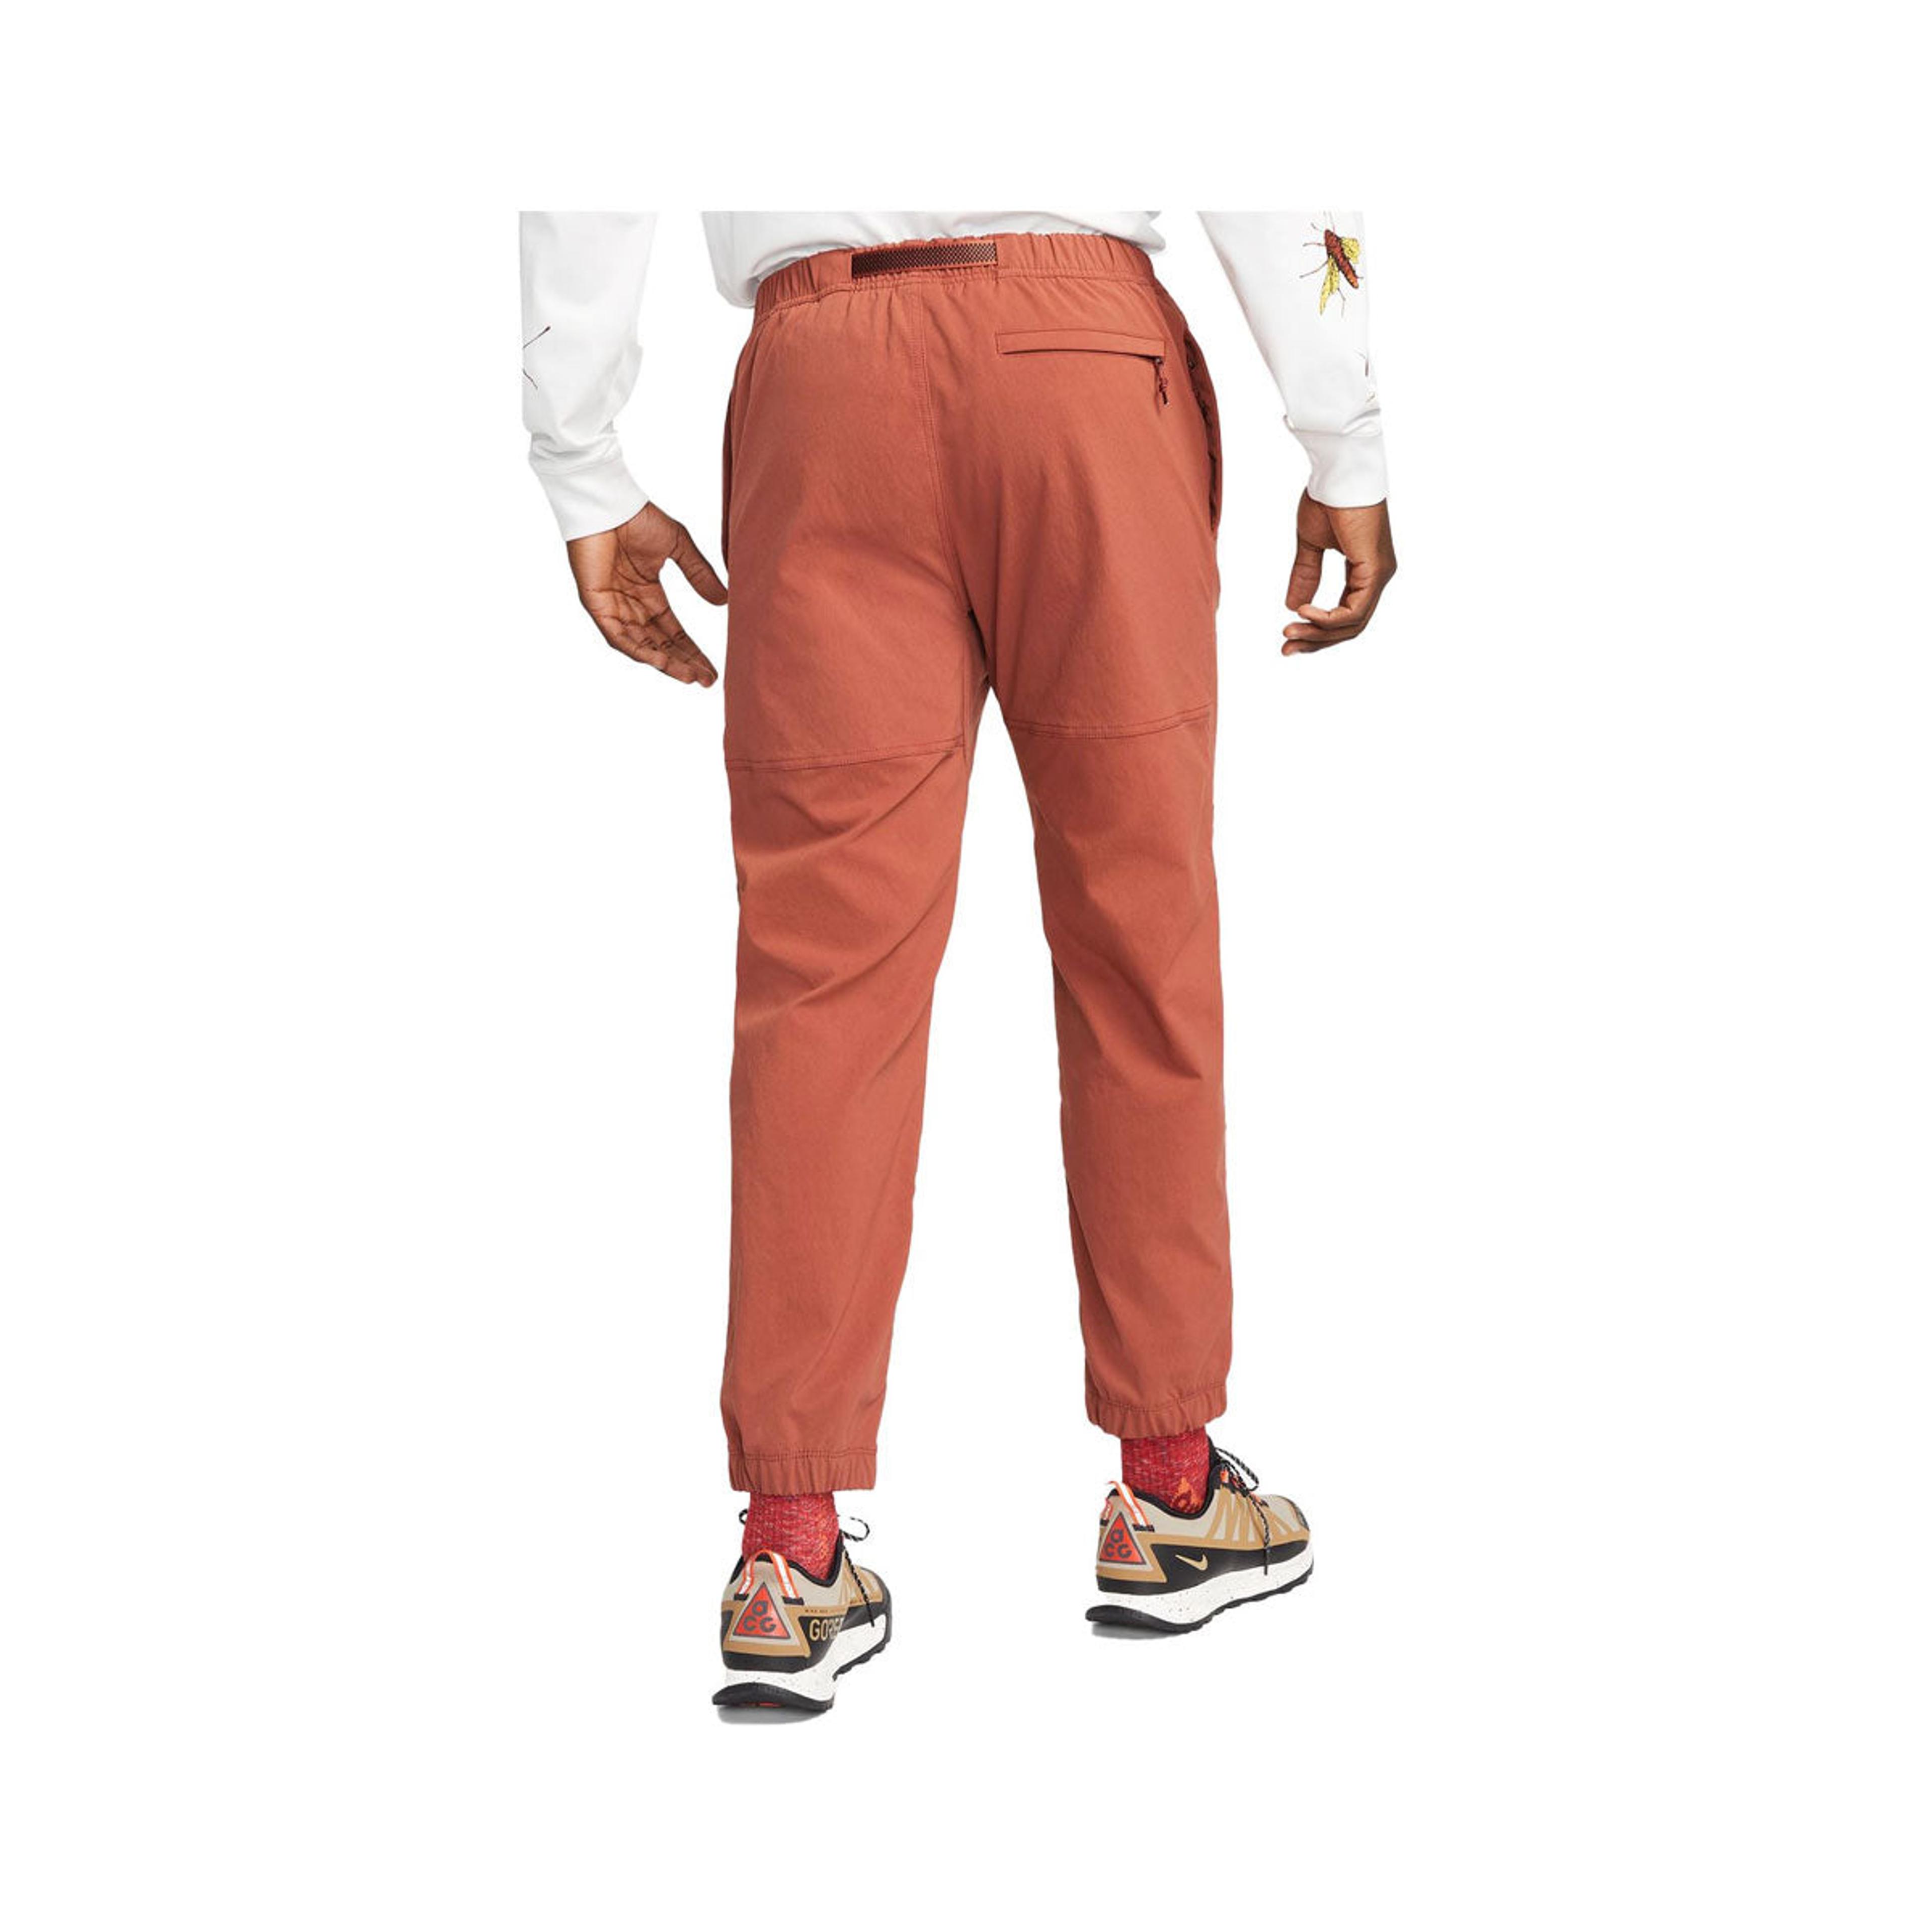 Alternate View 1 of Nike Men's ACG Trail Trousers